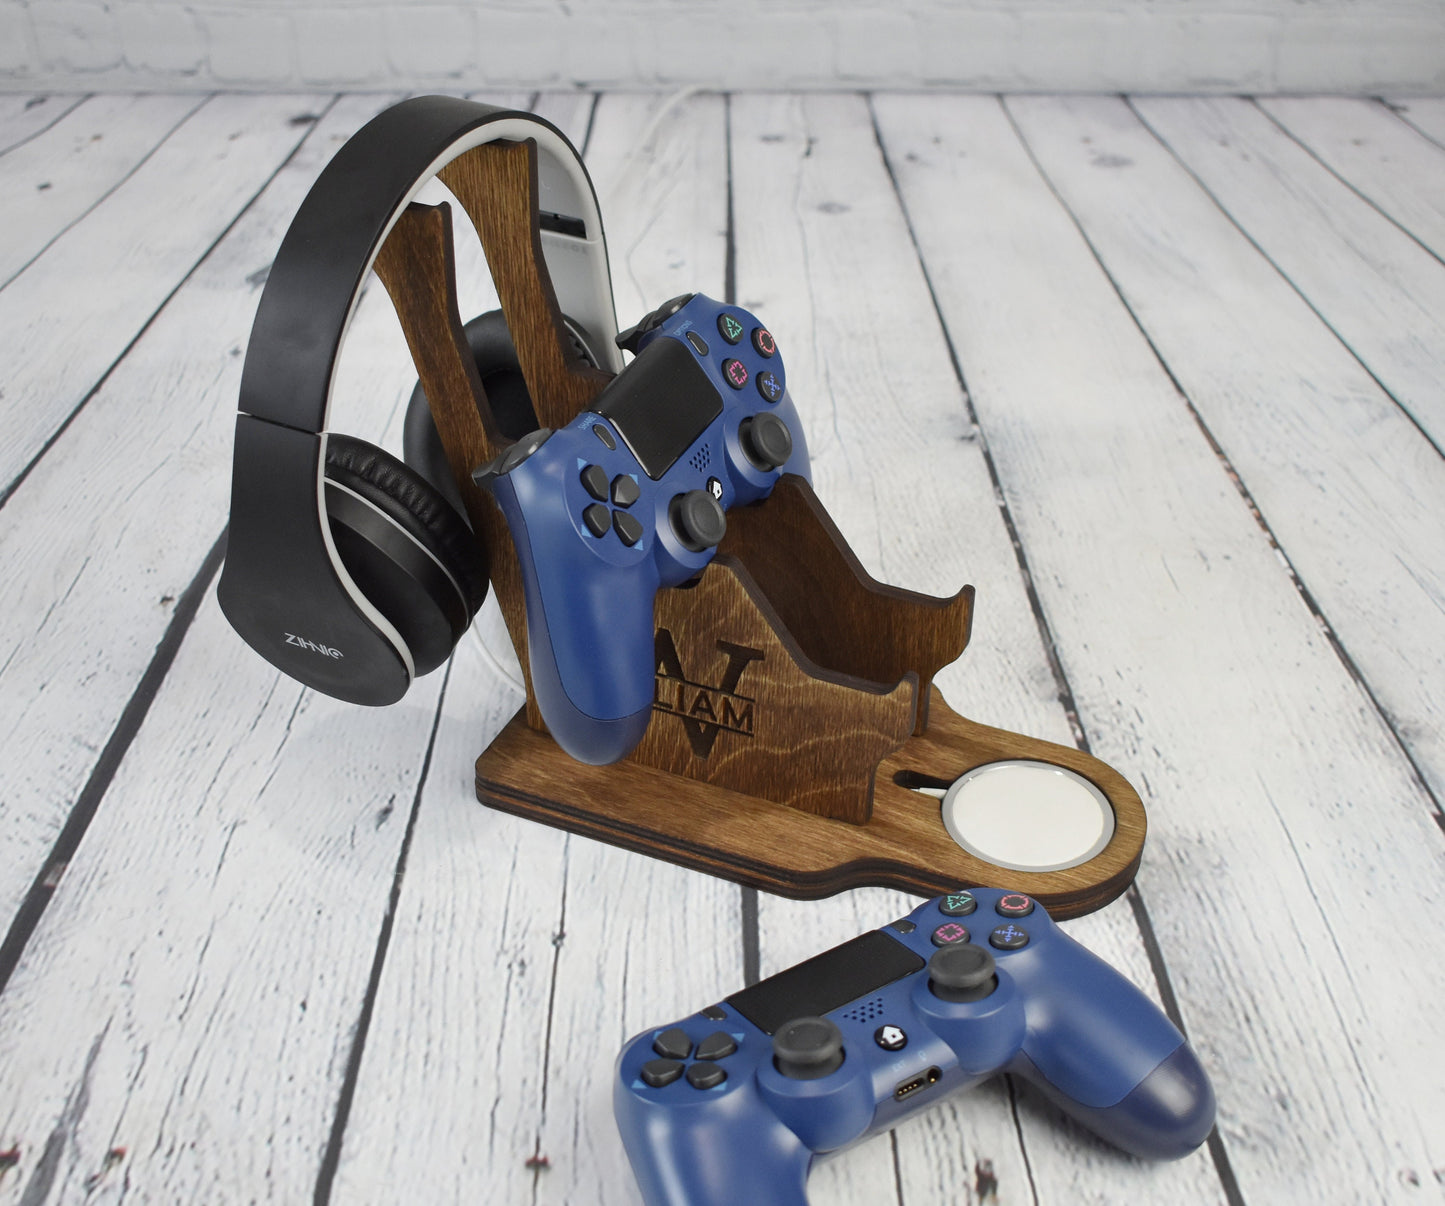 Wireless Headphone and Controller Stand - GS03